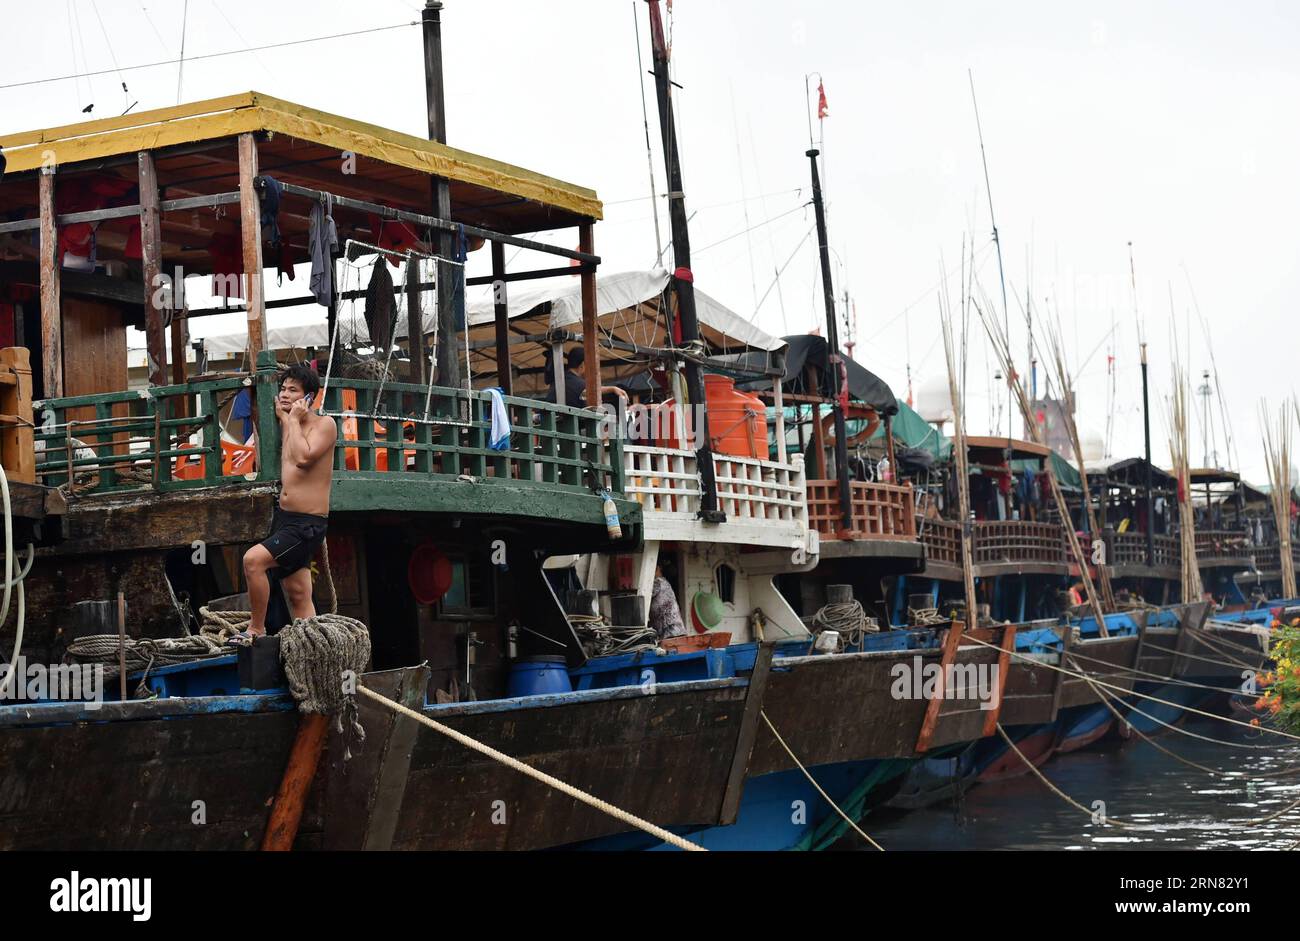 (151003) -- HAIKOU, Oct. 3, 2015 -- Ships berth at Xingang harbor in Haikou, capital of south China s Hainan Province, Oct. 3, 2015. A tropical depression strengthened to become Typhoon Mujigae early Friday morning, and the storm was still gathering power as it entered the eastern part of the South China sea. ) (zkr) CHINA-HAINAN-TYPHOON MUJIGAE-APPROACHING(CN) ZhaoxYingquan PUBLICATIONxNOTxINxCHN   Haikou OCT 3 2015 Ships Berth AT Xingang Harbor in Haikou Capital of South China S Hainan Province OCT 3 2015 a Tropical Depression strengthened to Become Typhoon Mujigae Early Friday Morning and T Stock Photo